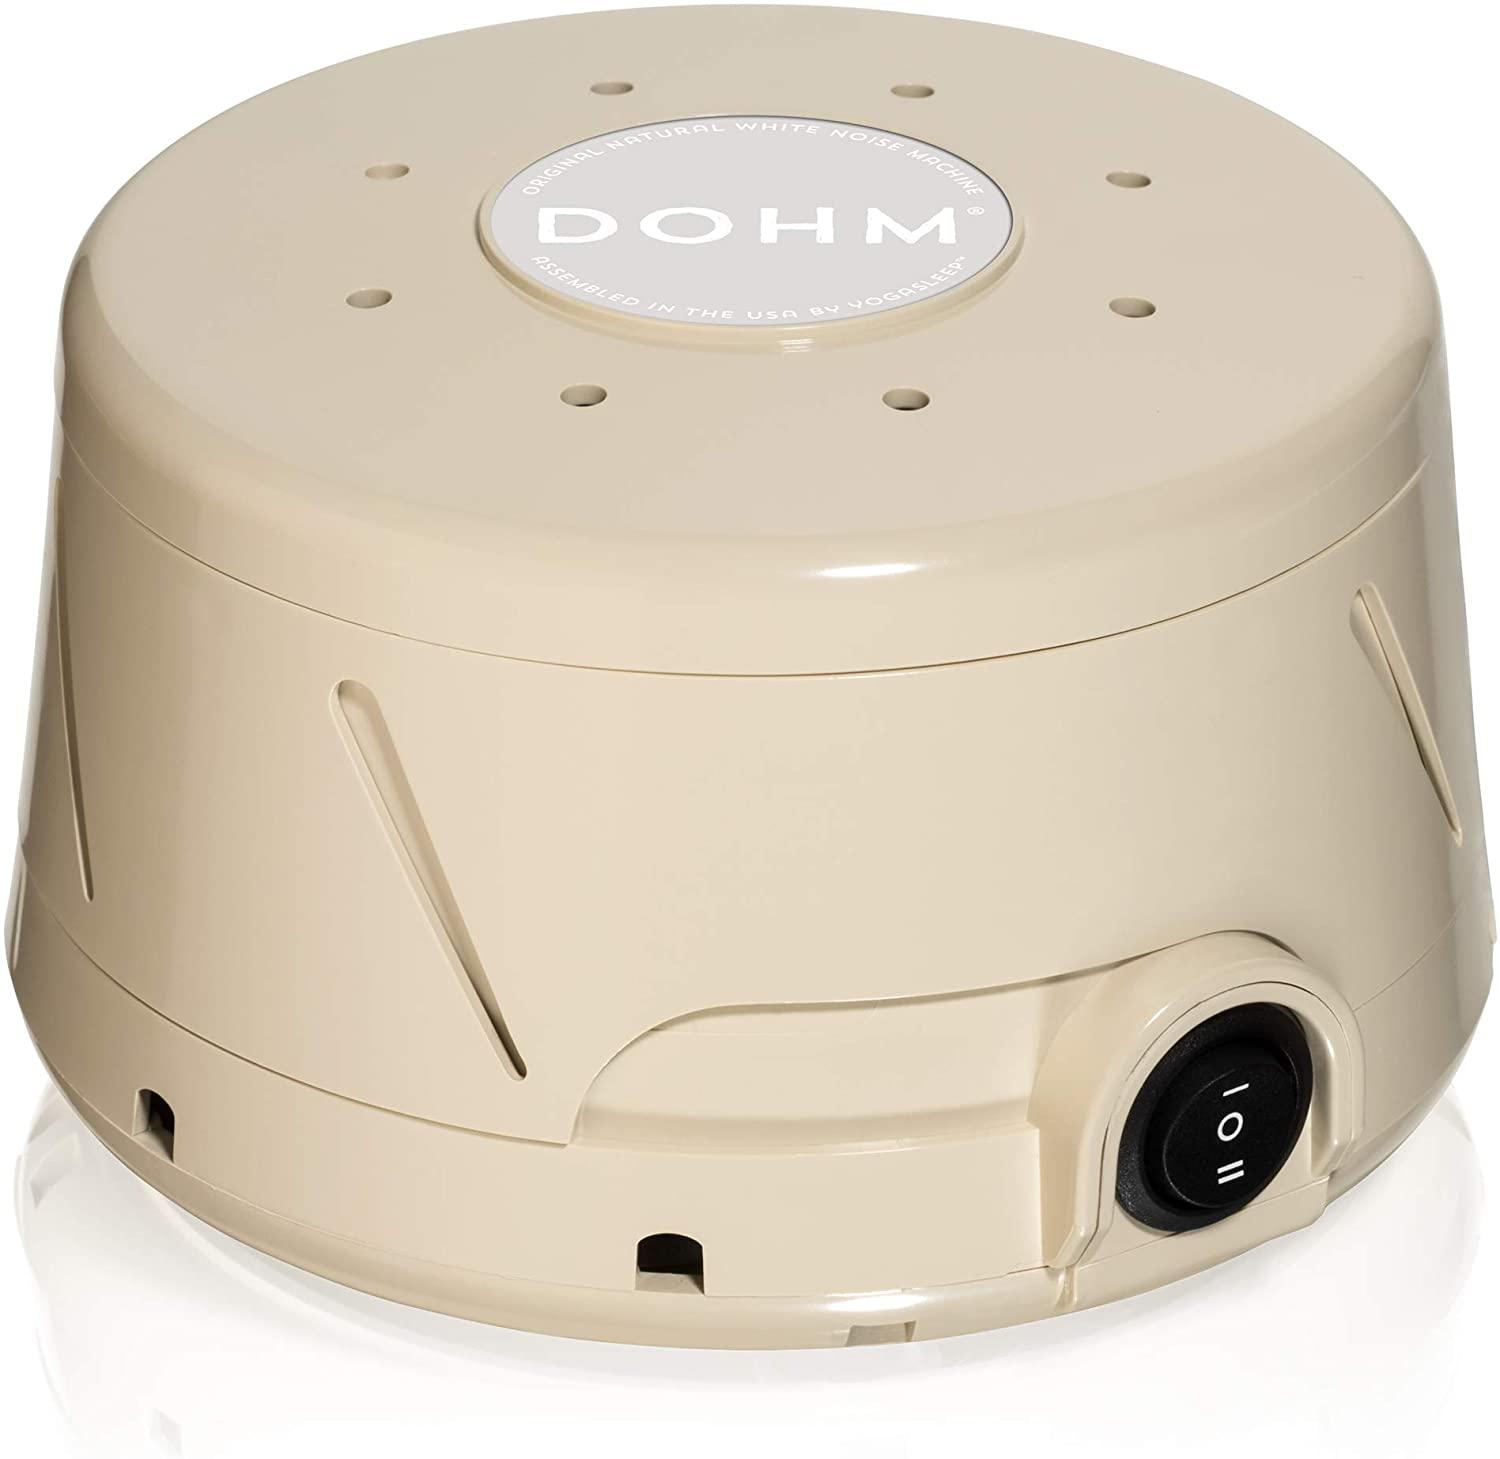 Marmac Dohm Classic Fan-Based Natural White Noise Sound Machine for $21.33